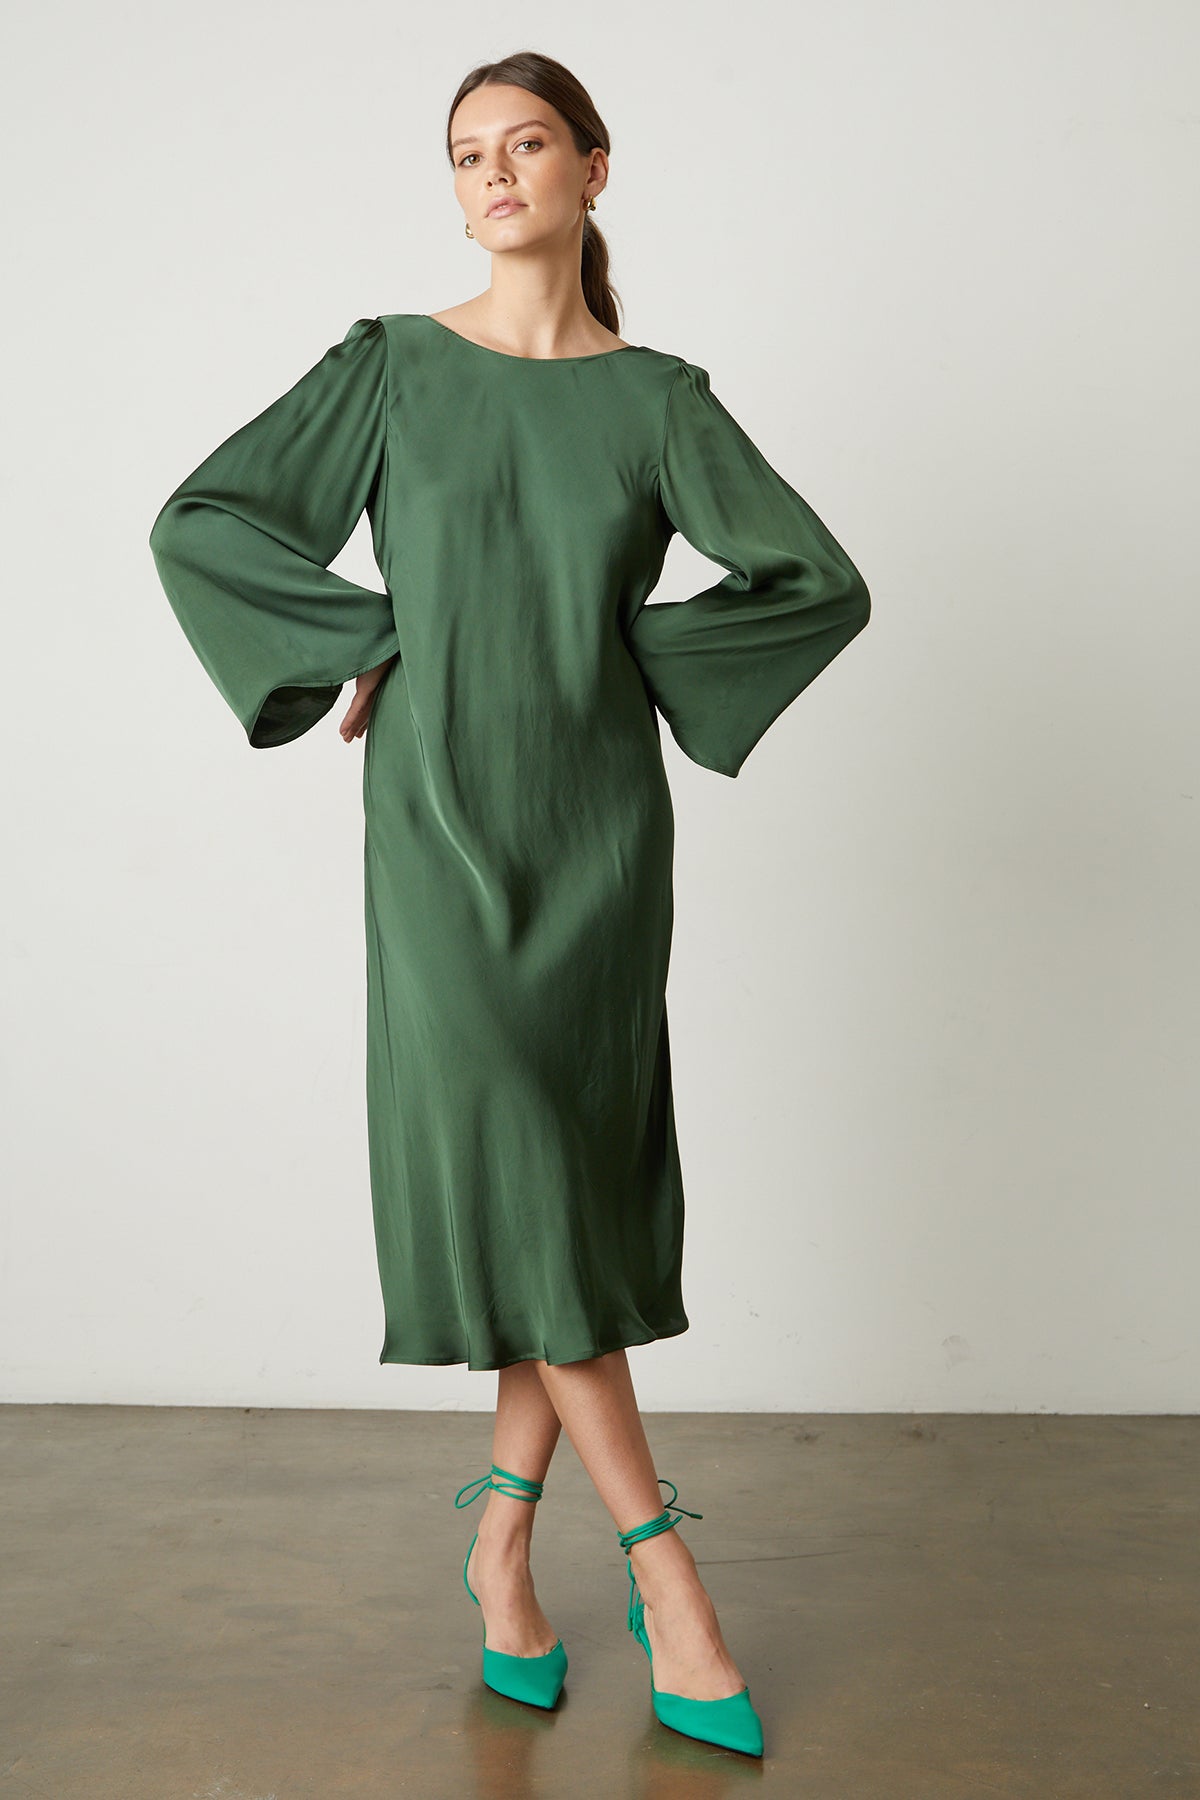 Catherine Satin Midi Dress in fern green full length front view-25668993810625